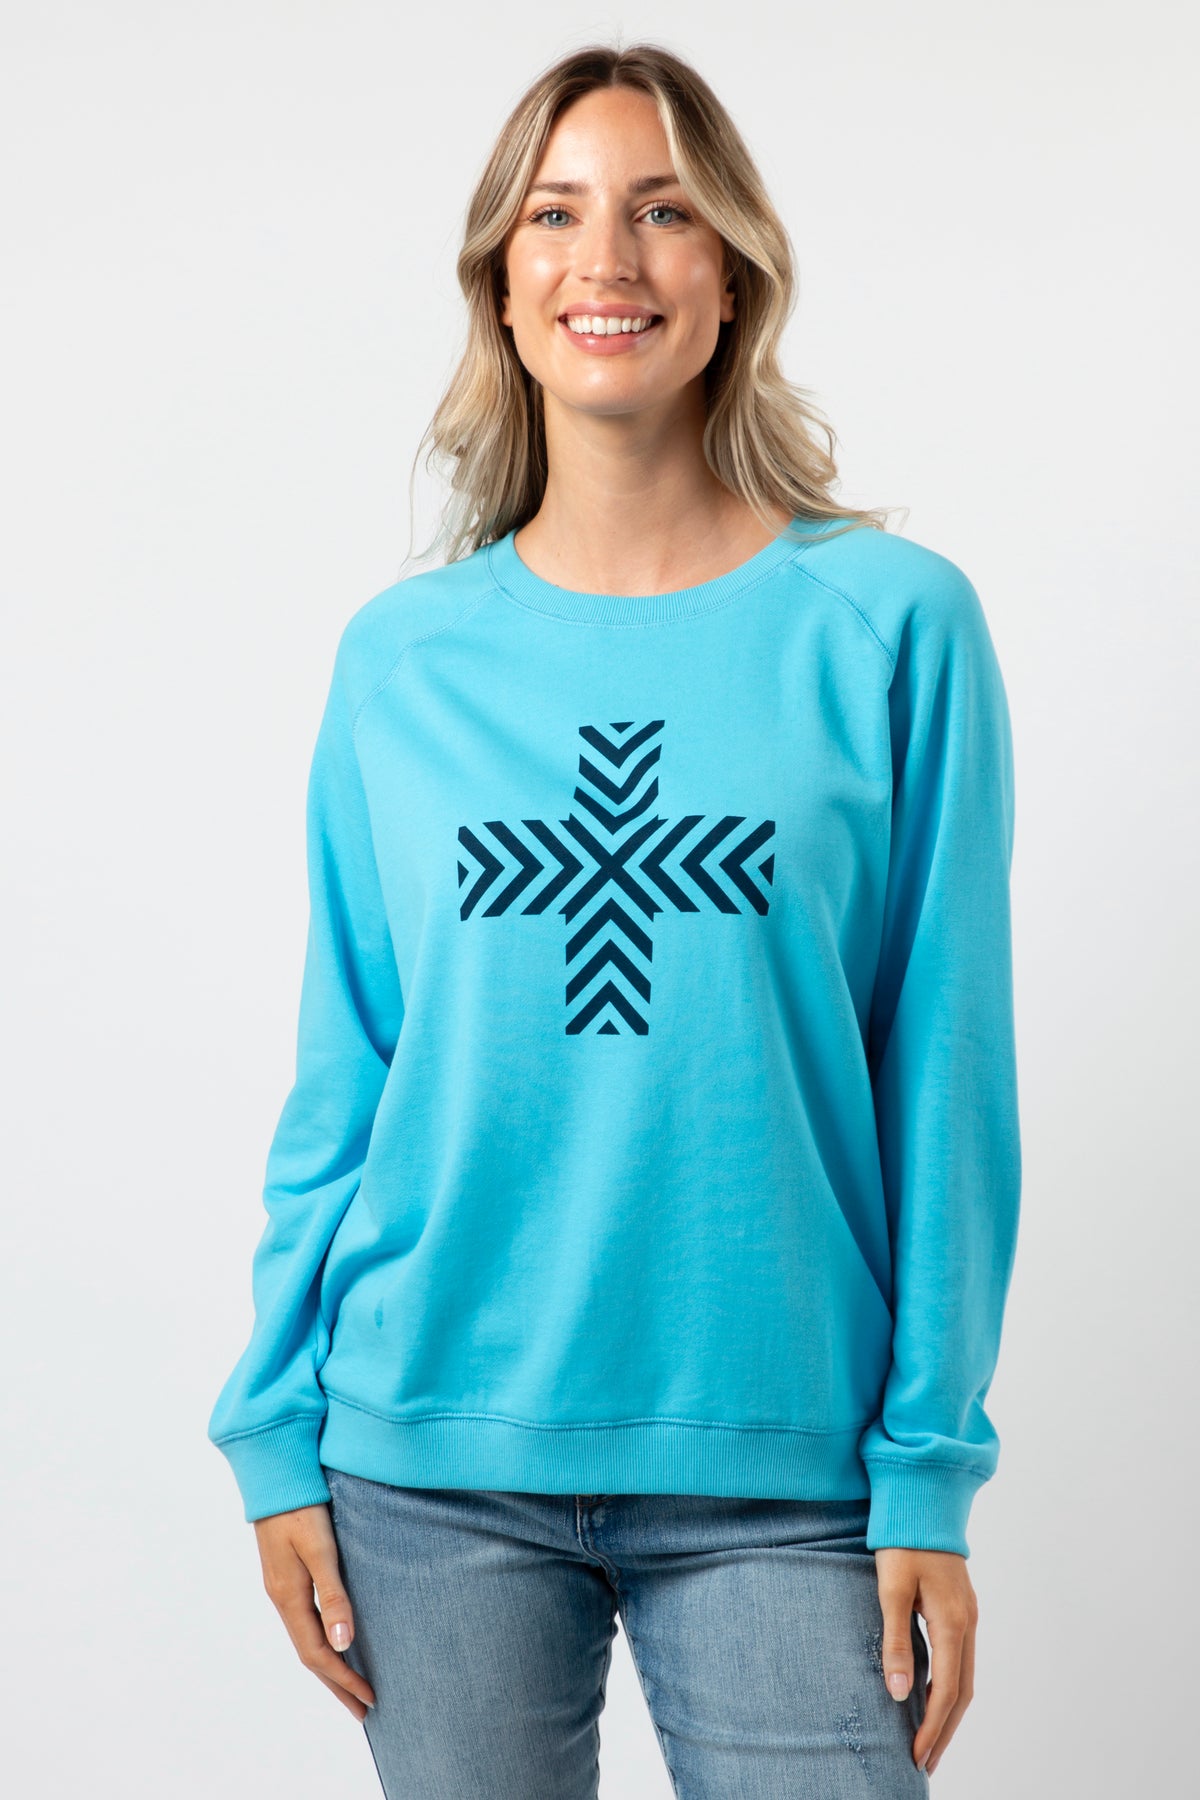 Classic Sweater Sky Blue With Chervon Cross - PREORDER DELIVERY END APRIL